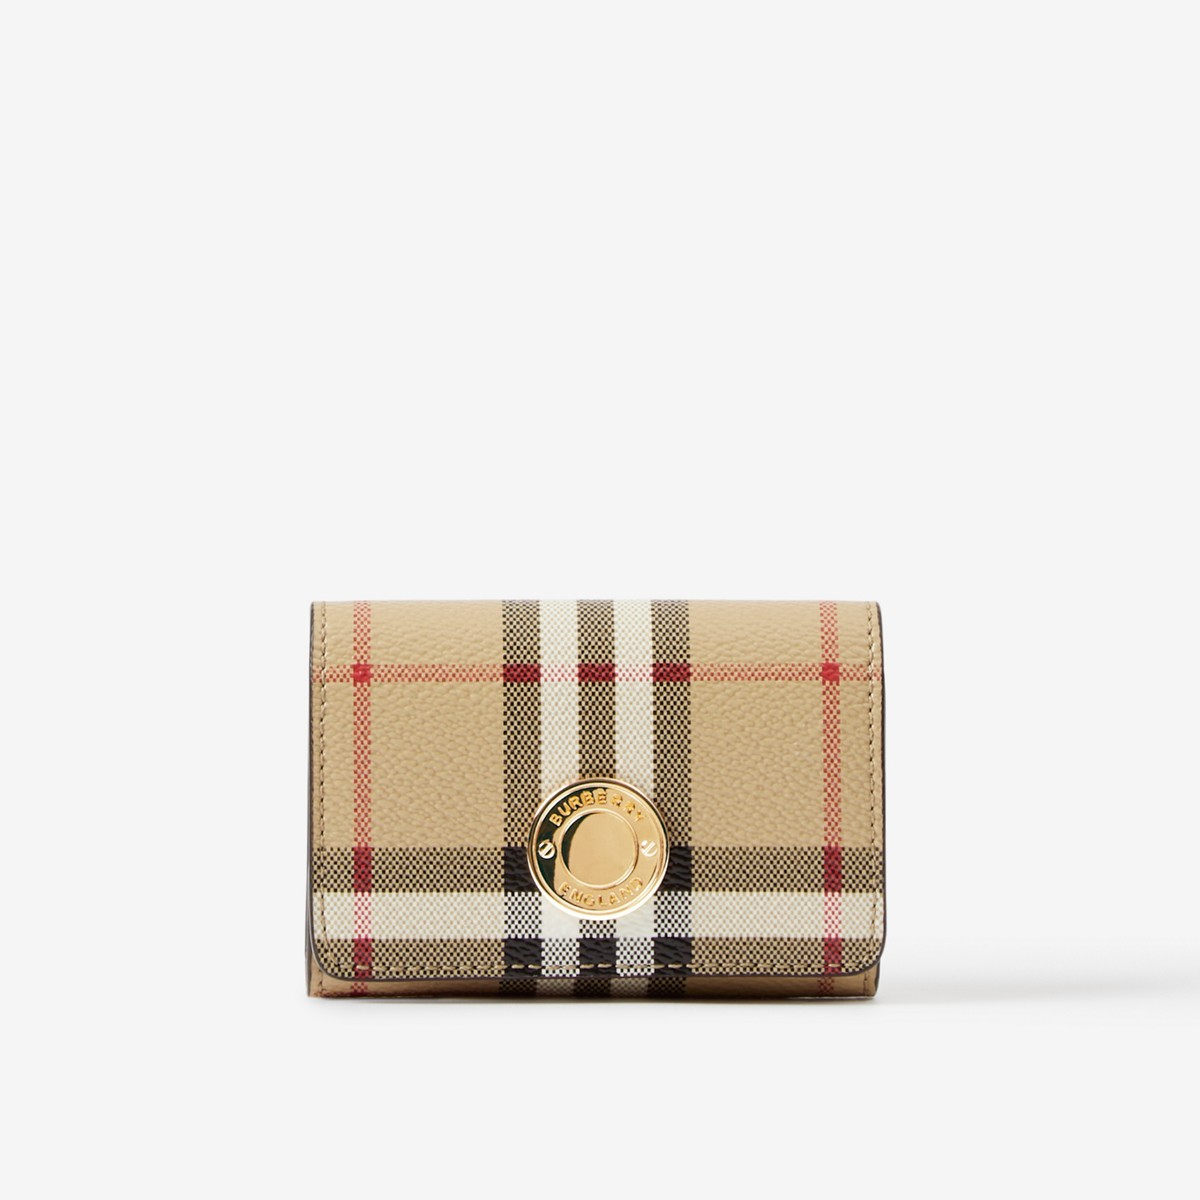 Burberry Check Card Case With Detachable Chain Strap In Archive Beige